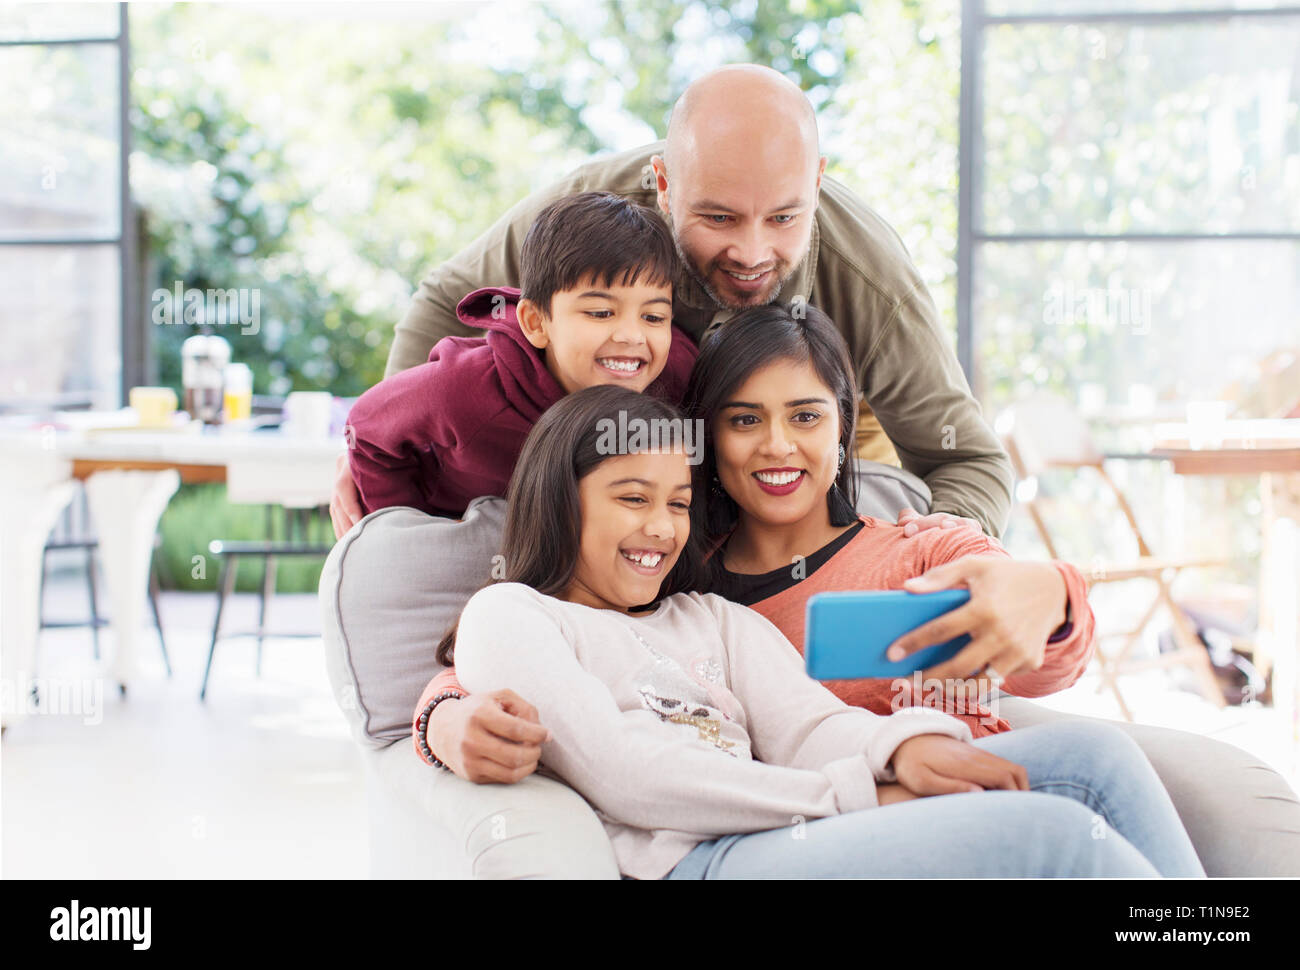 Family taking selfie with camera phone Stock Photo